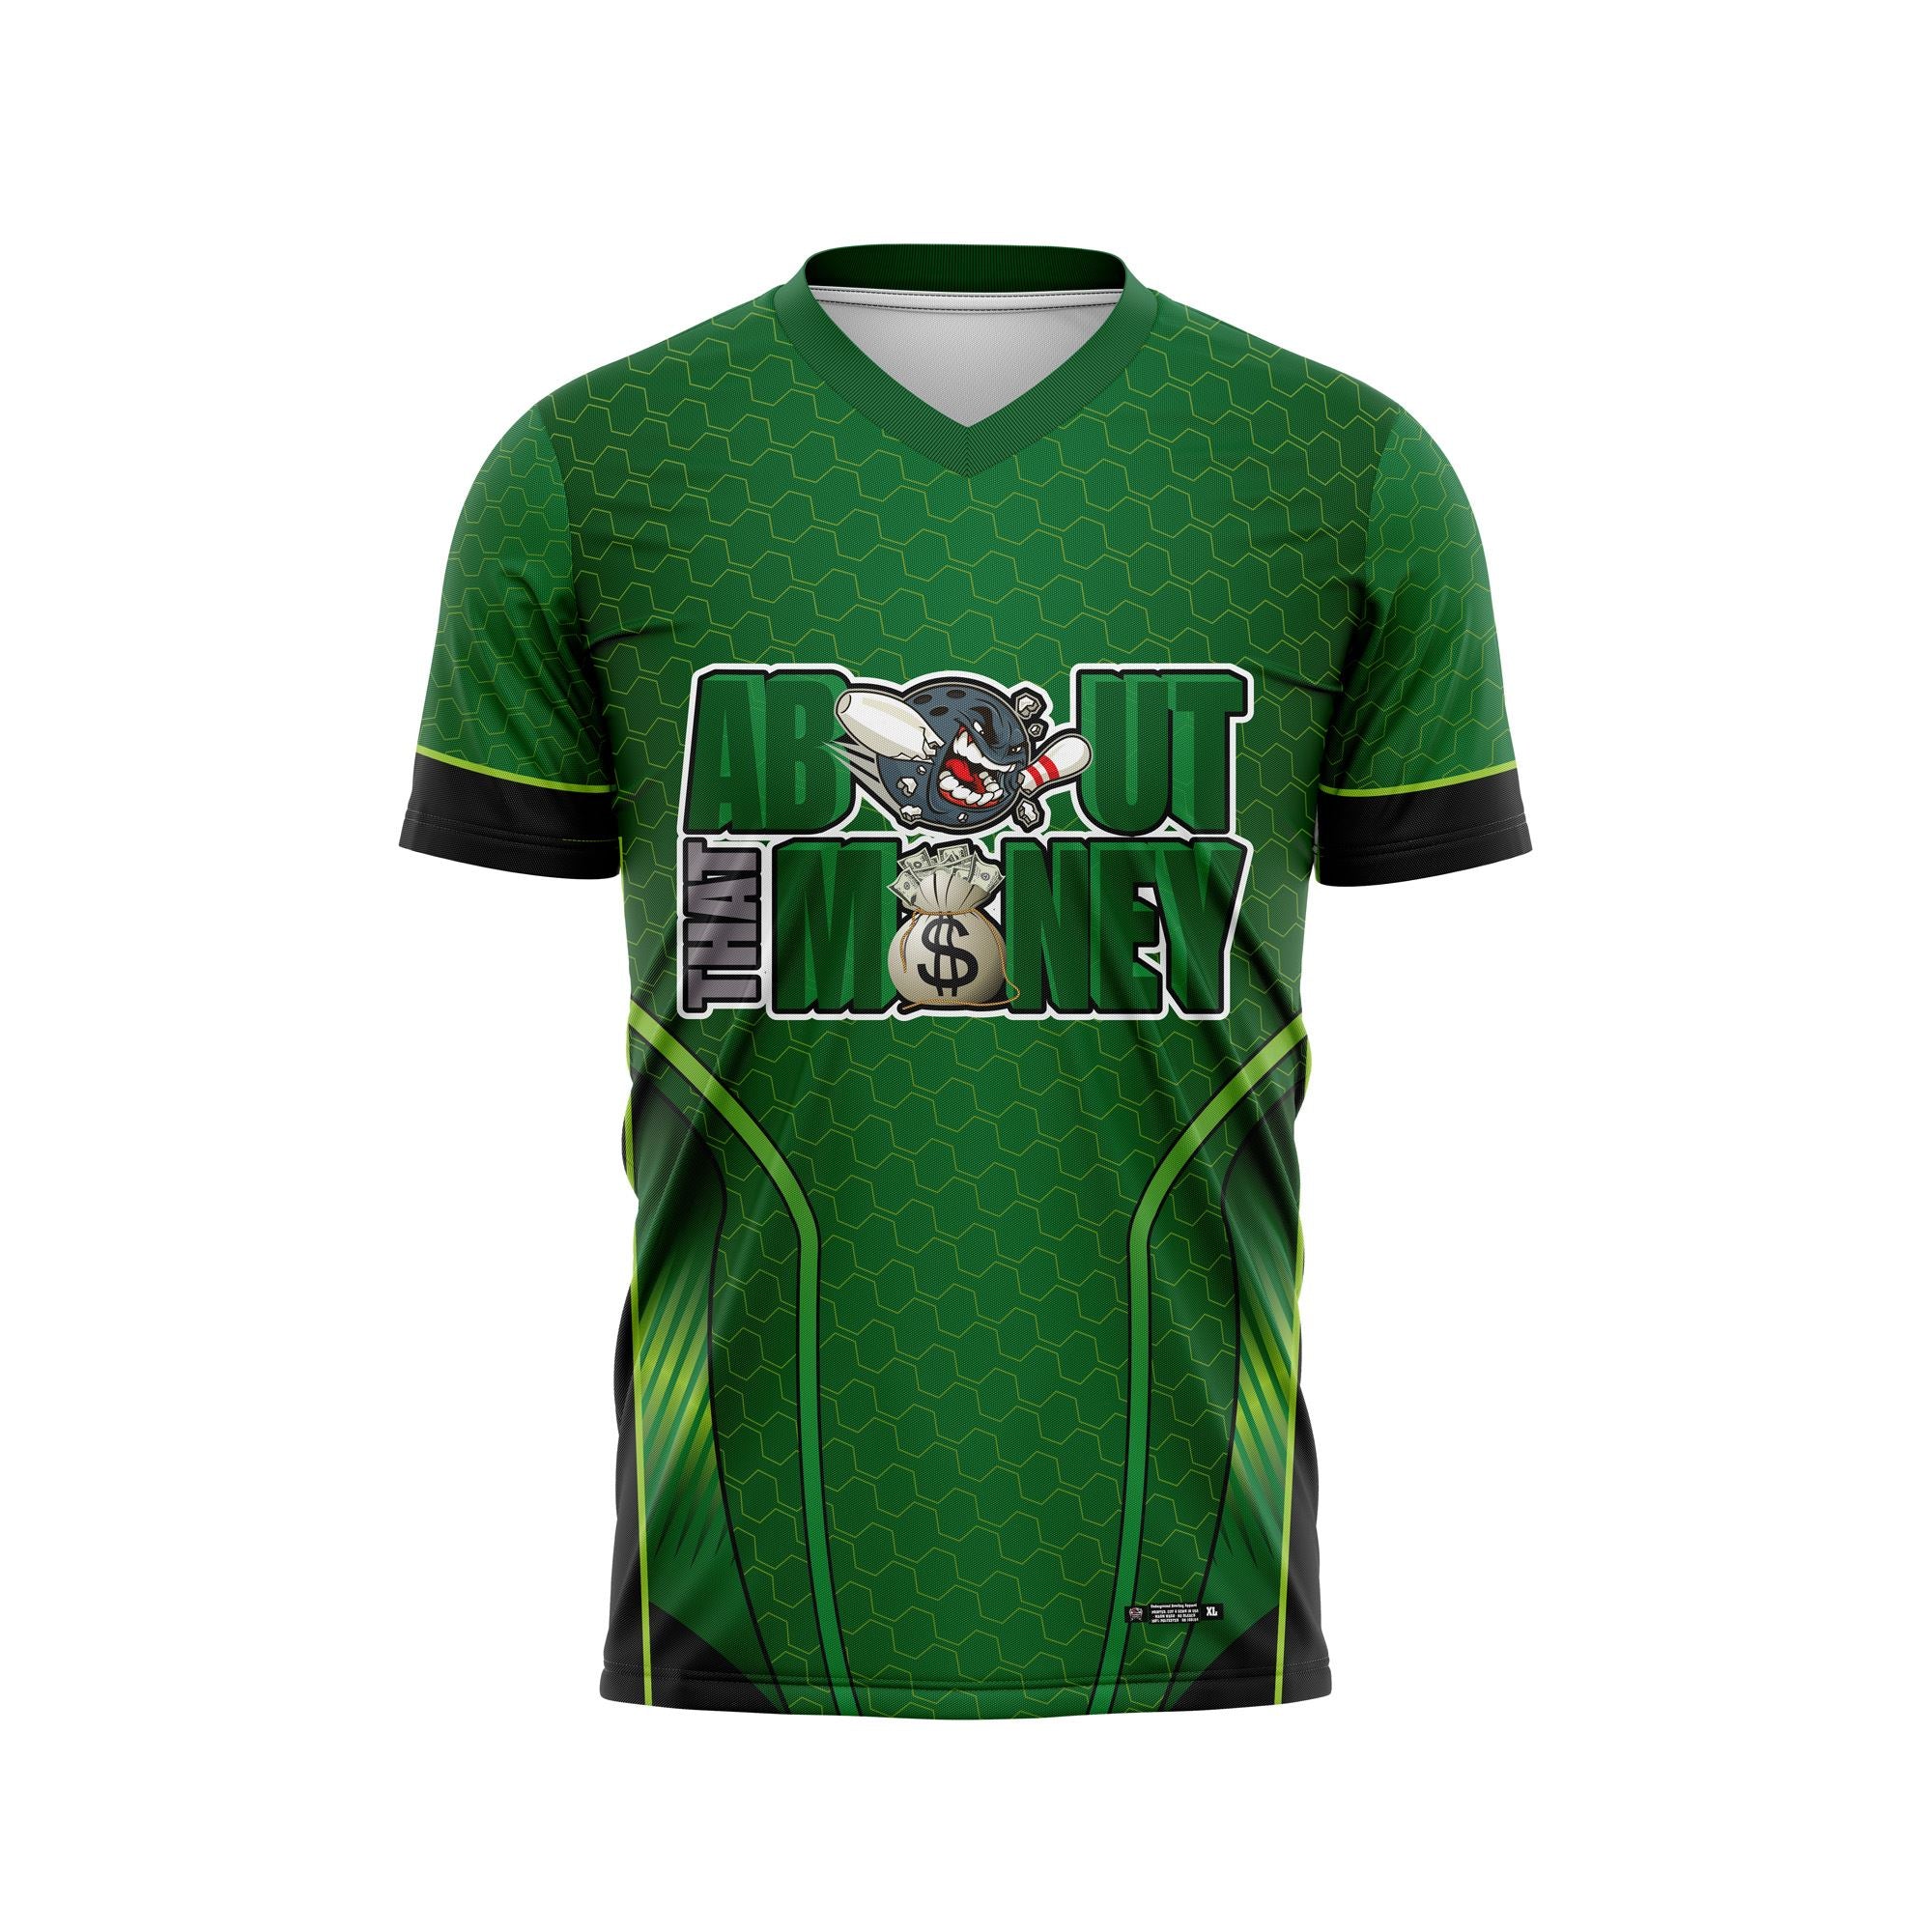 About The Money Green Jerseys